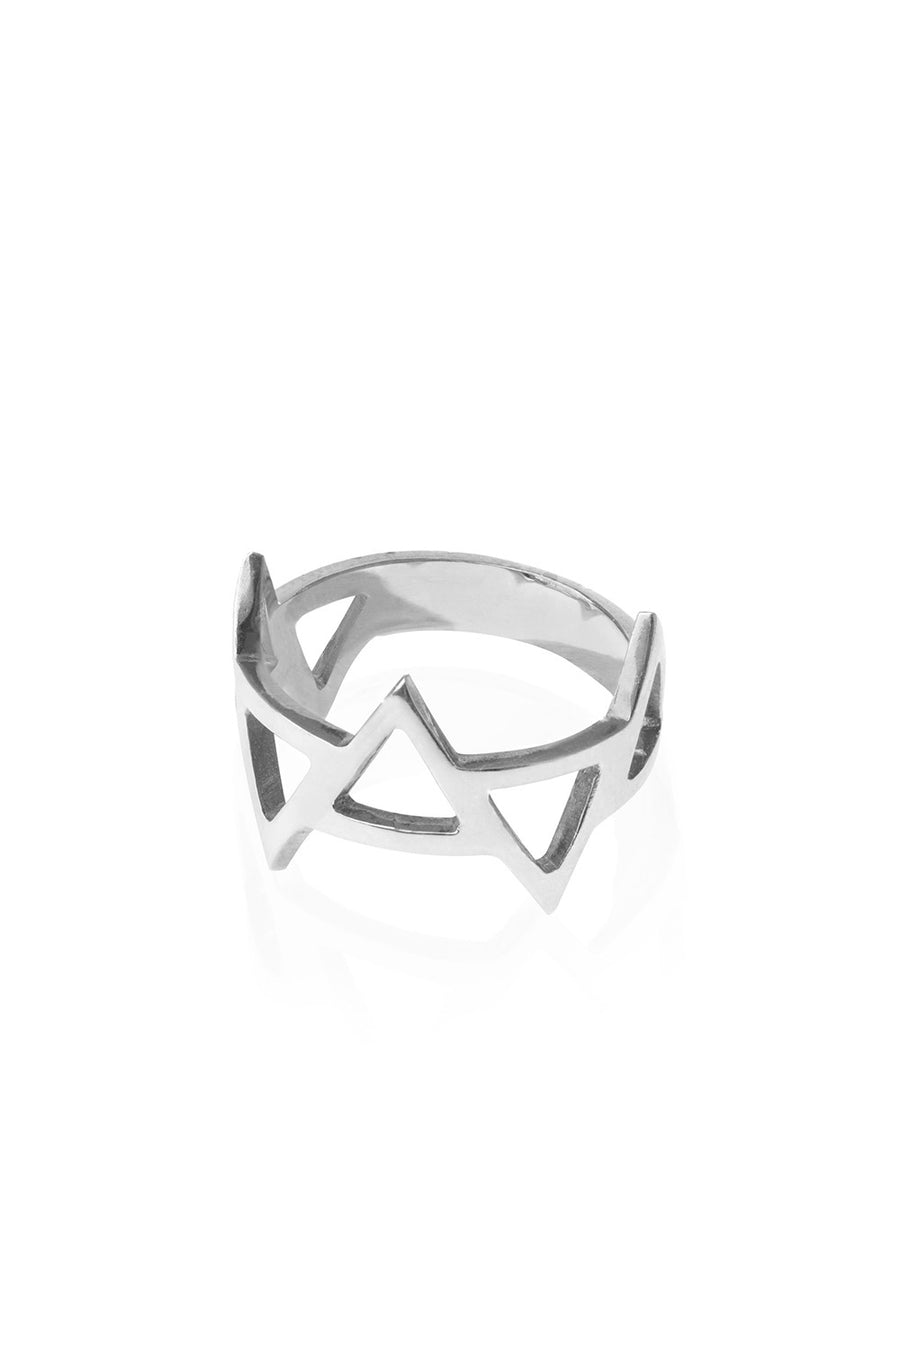 Ladder of Life, Silver Ring